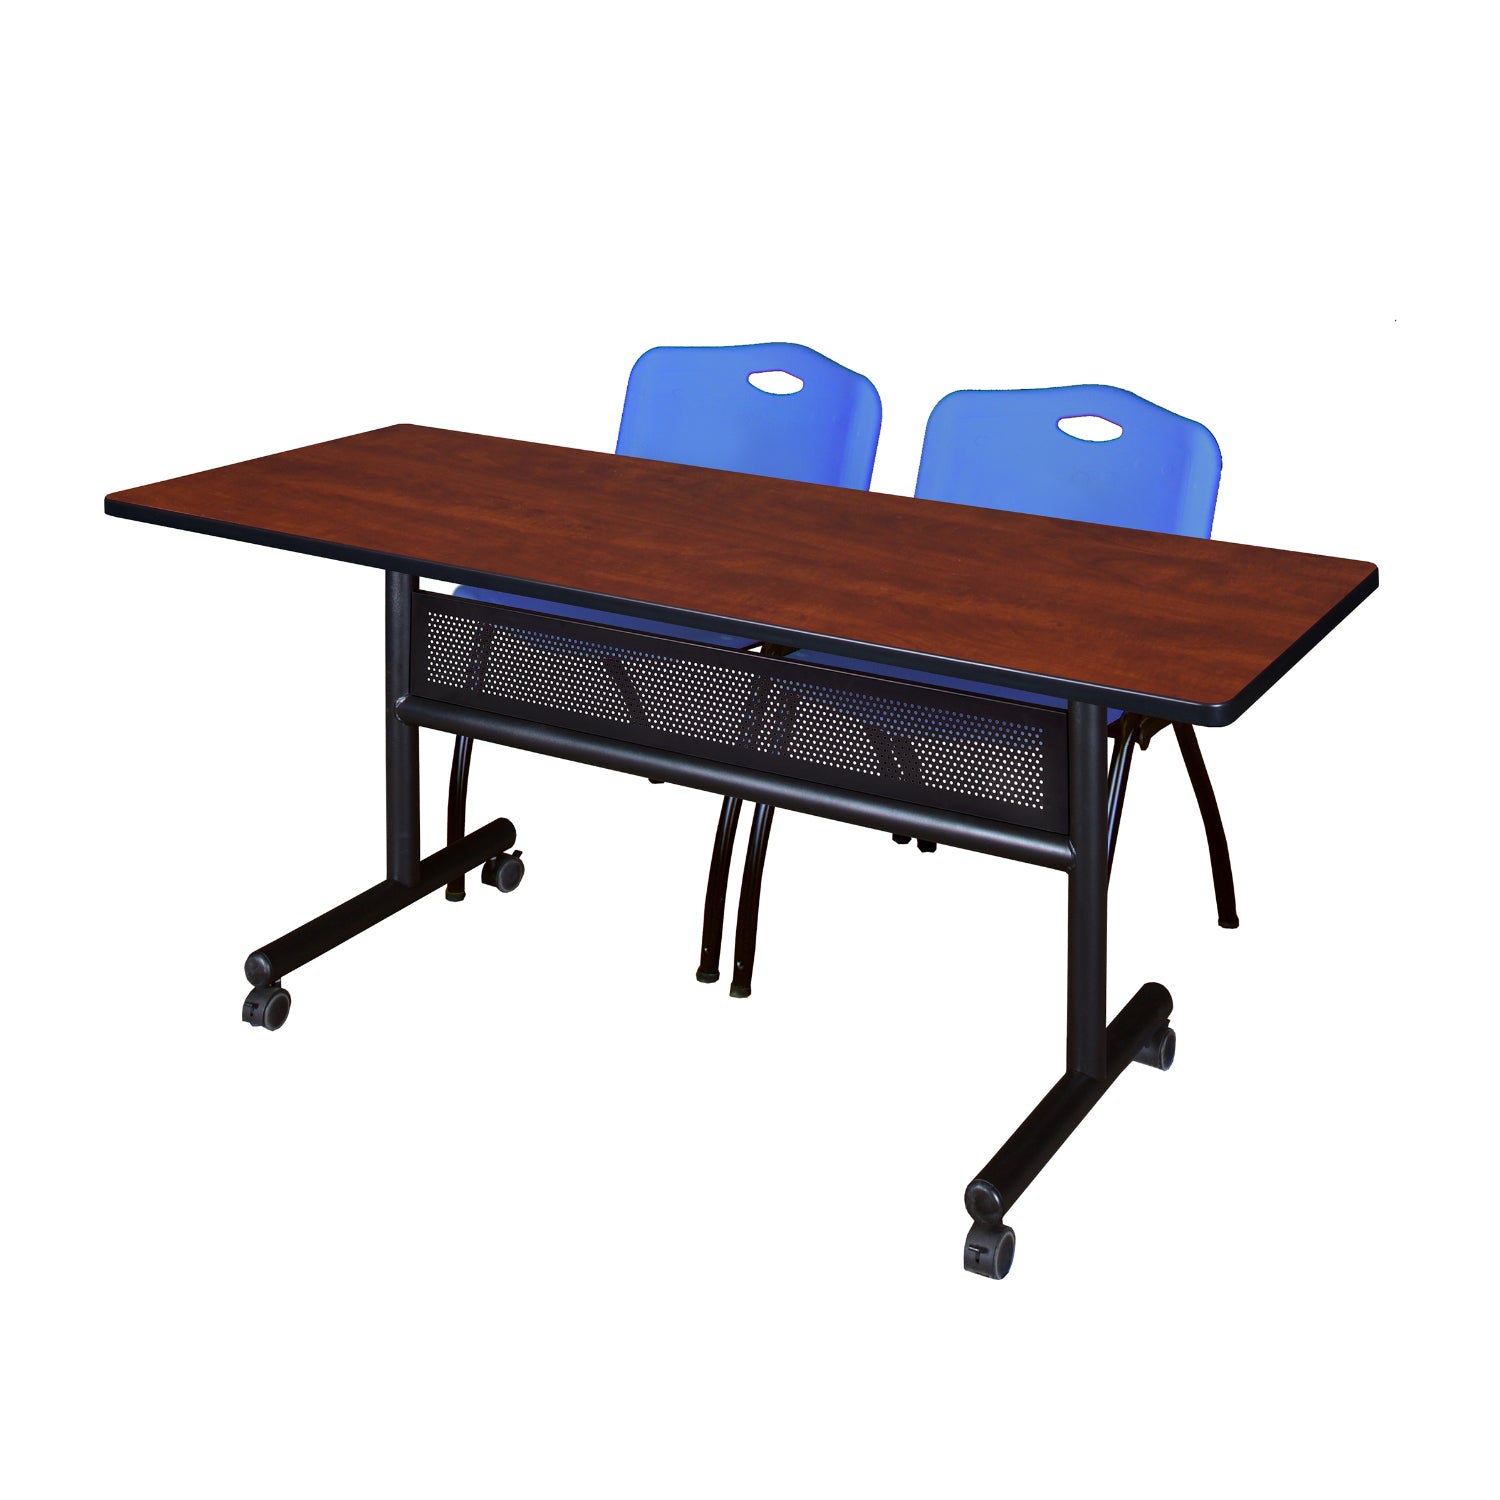 Kobe Flip Top Privacy Training Table and Chair Package, Kobe 60" x 24" Flip Top Mobile Nesting Table with Modesty Panel and 2 "M" Stack Chairs